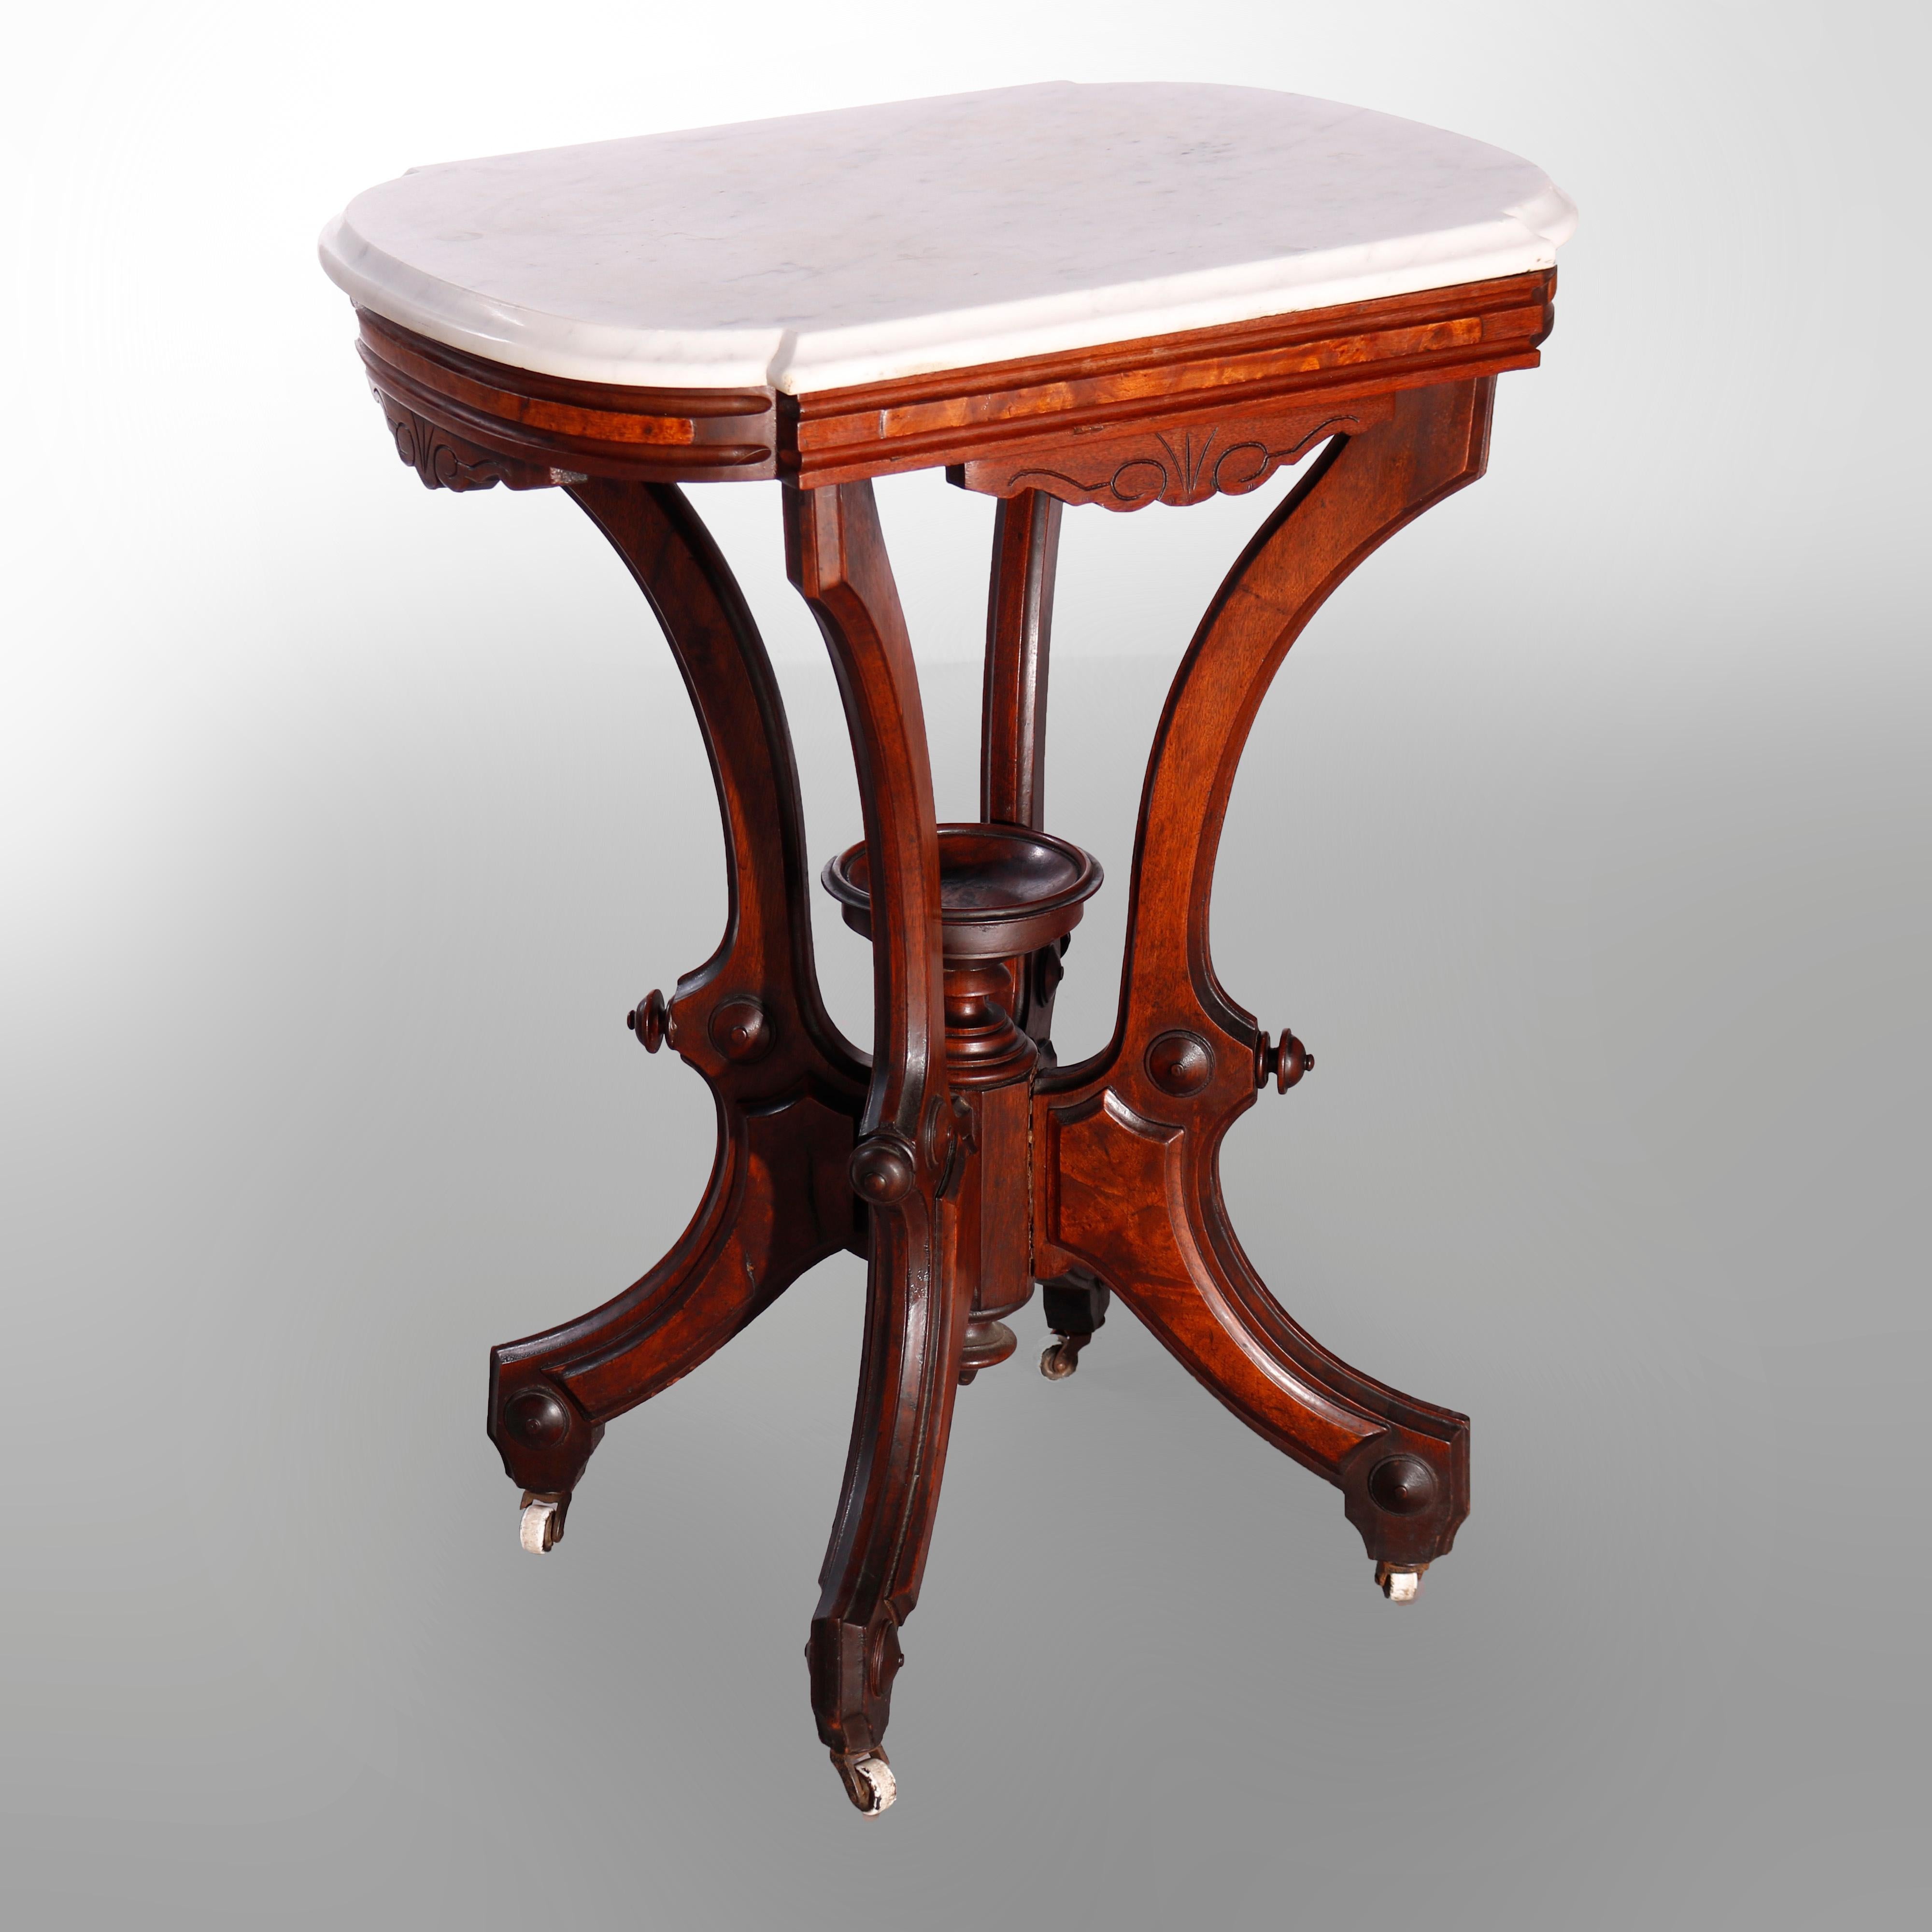 19th Century Antique Victorian Carved Walnut, Burl & Marble Parlor Table circa 1890